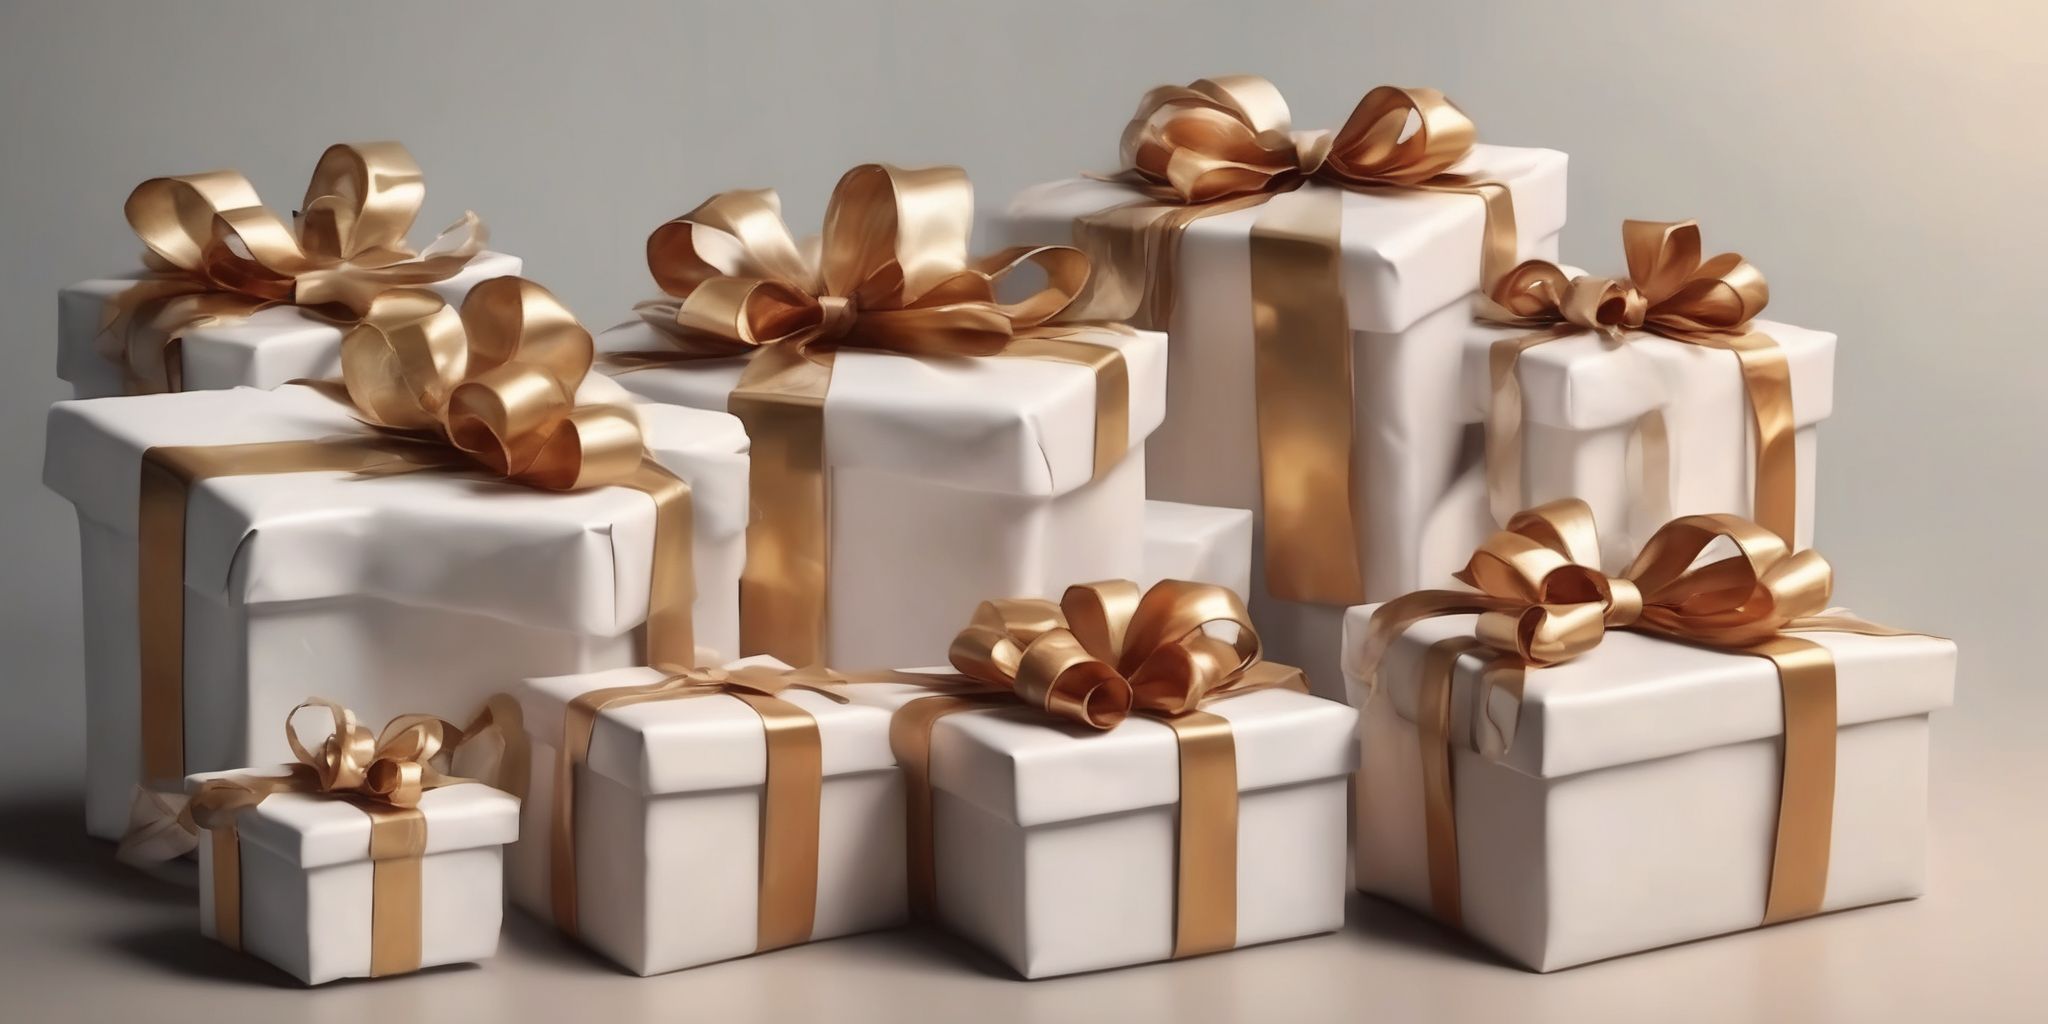 Gifts  in realistic, photographic style